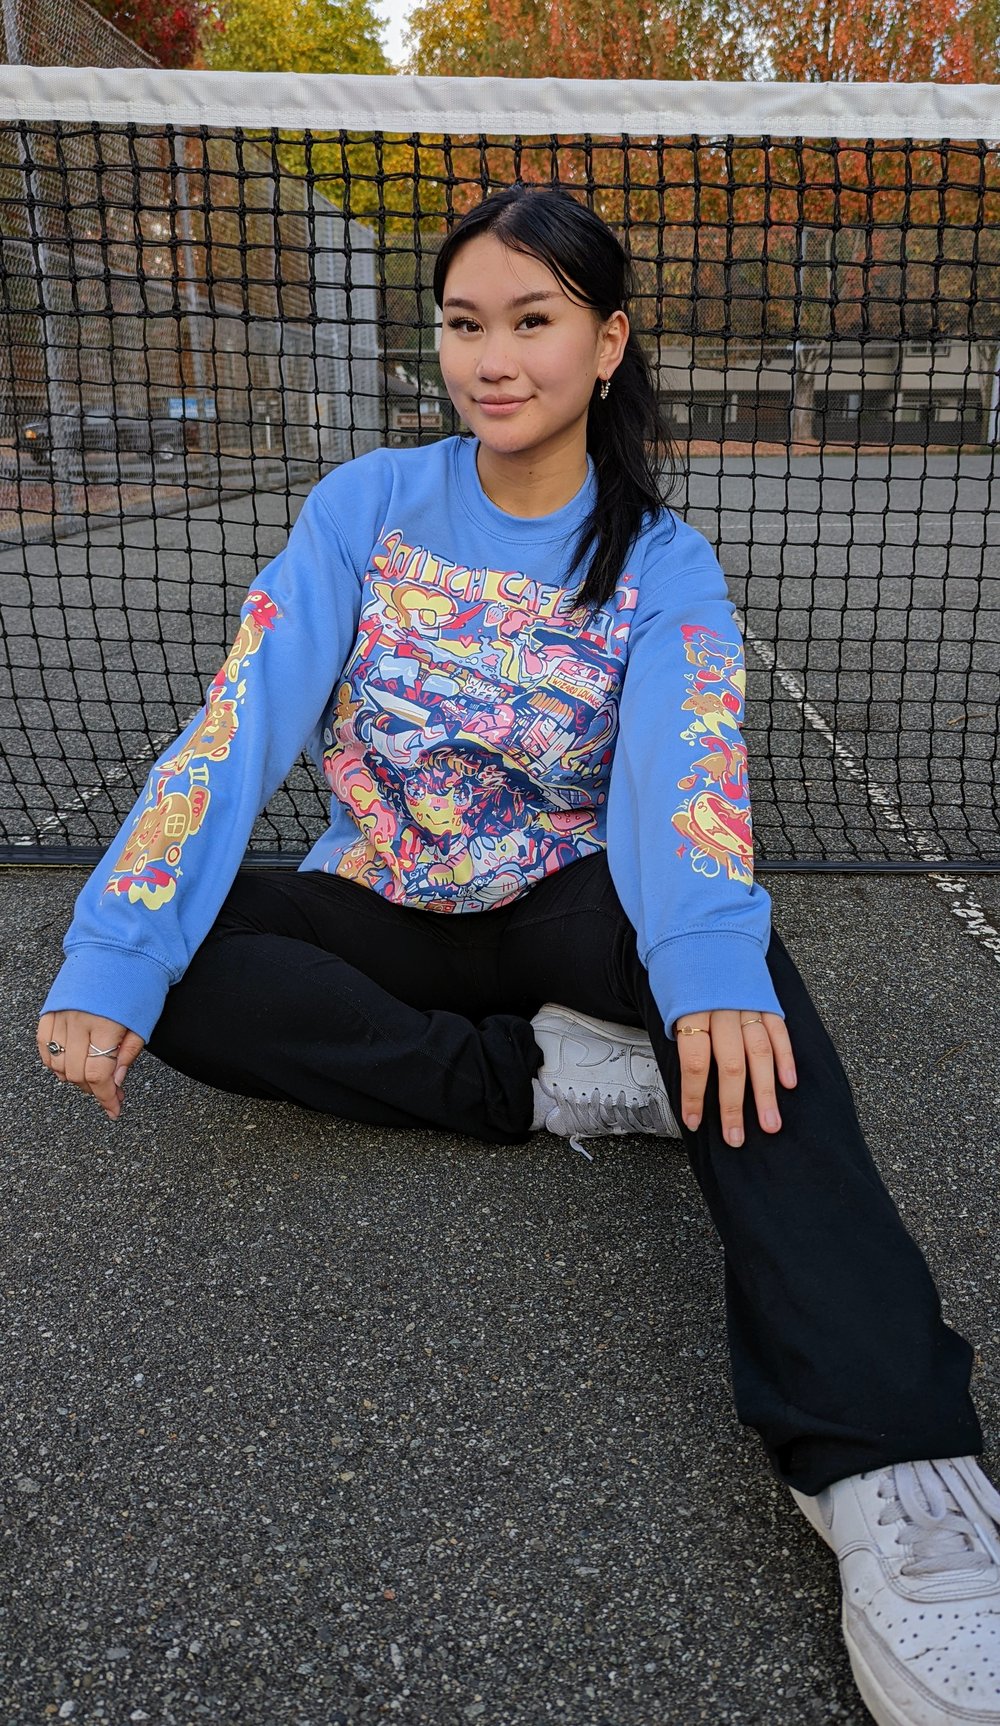 Image of Witch Cafe Sweater